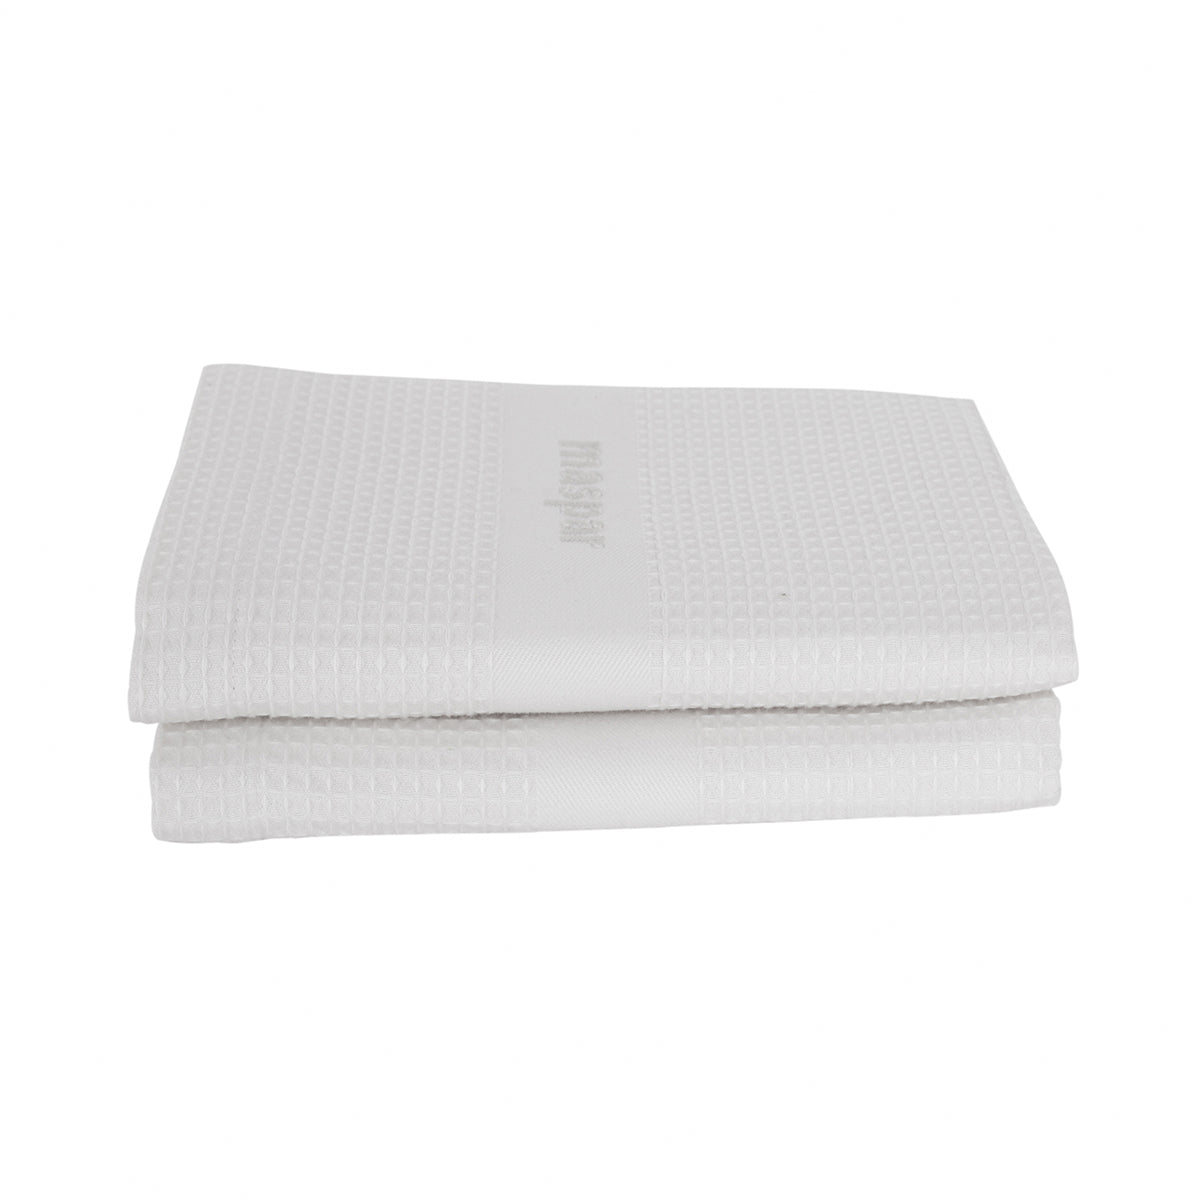 Catalina Waffle Antimicrobial Antifungal Super Absorbent Quick Dry Gym/Travel White Towel Set